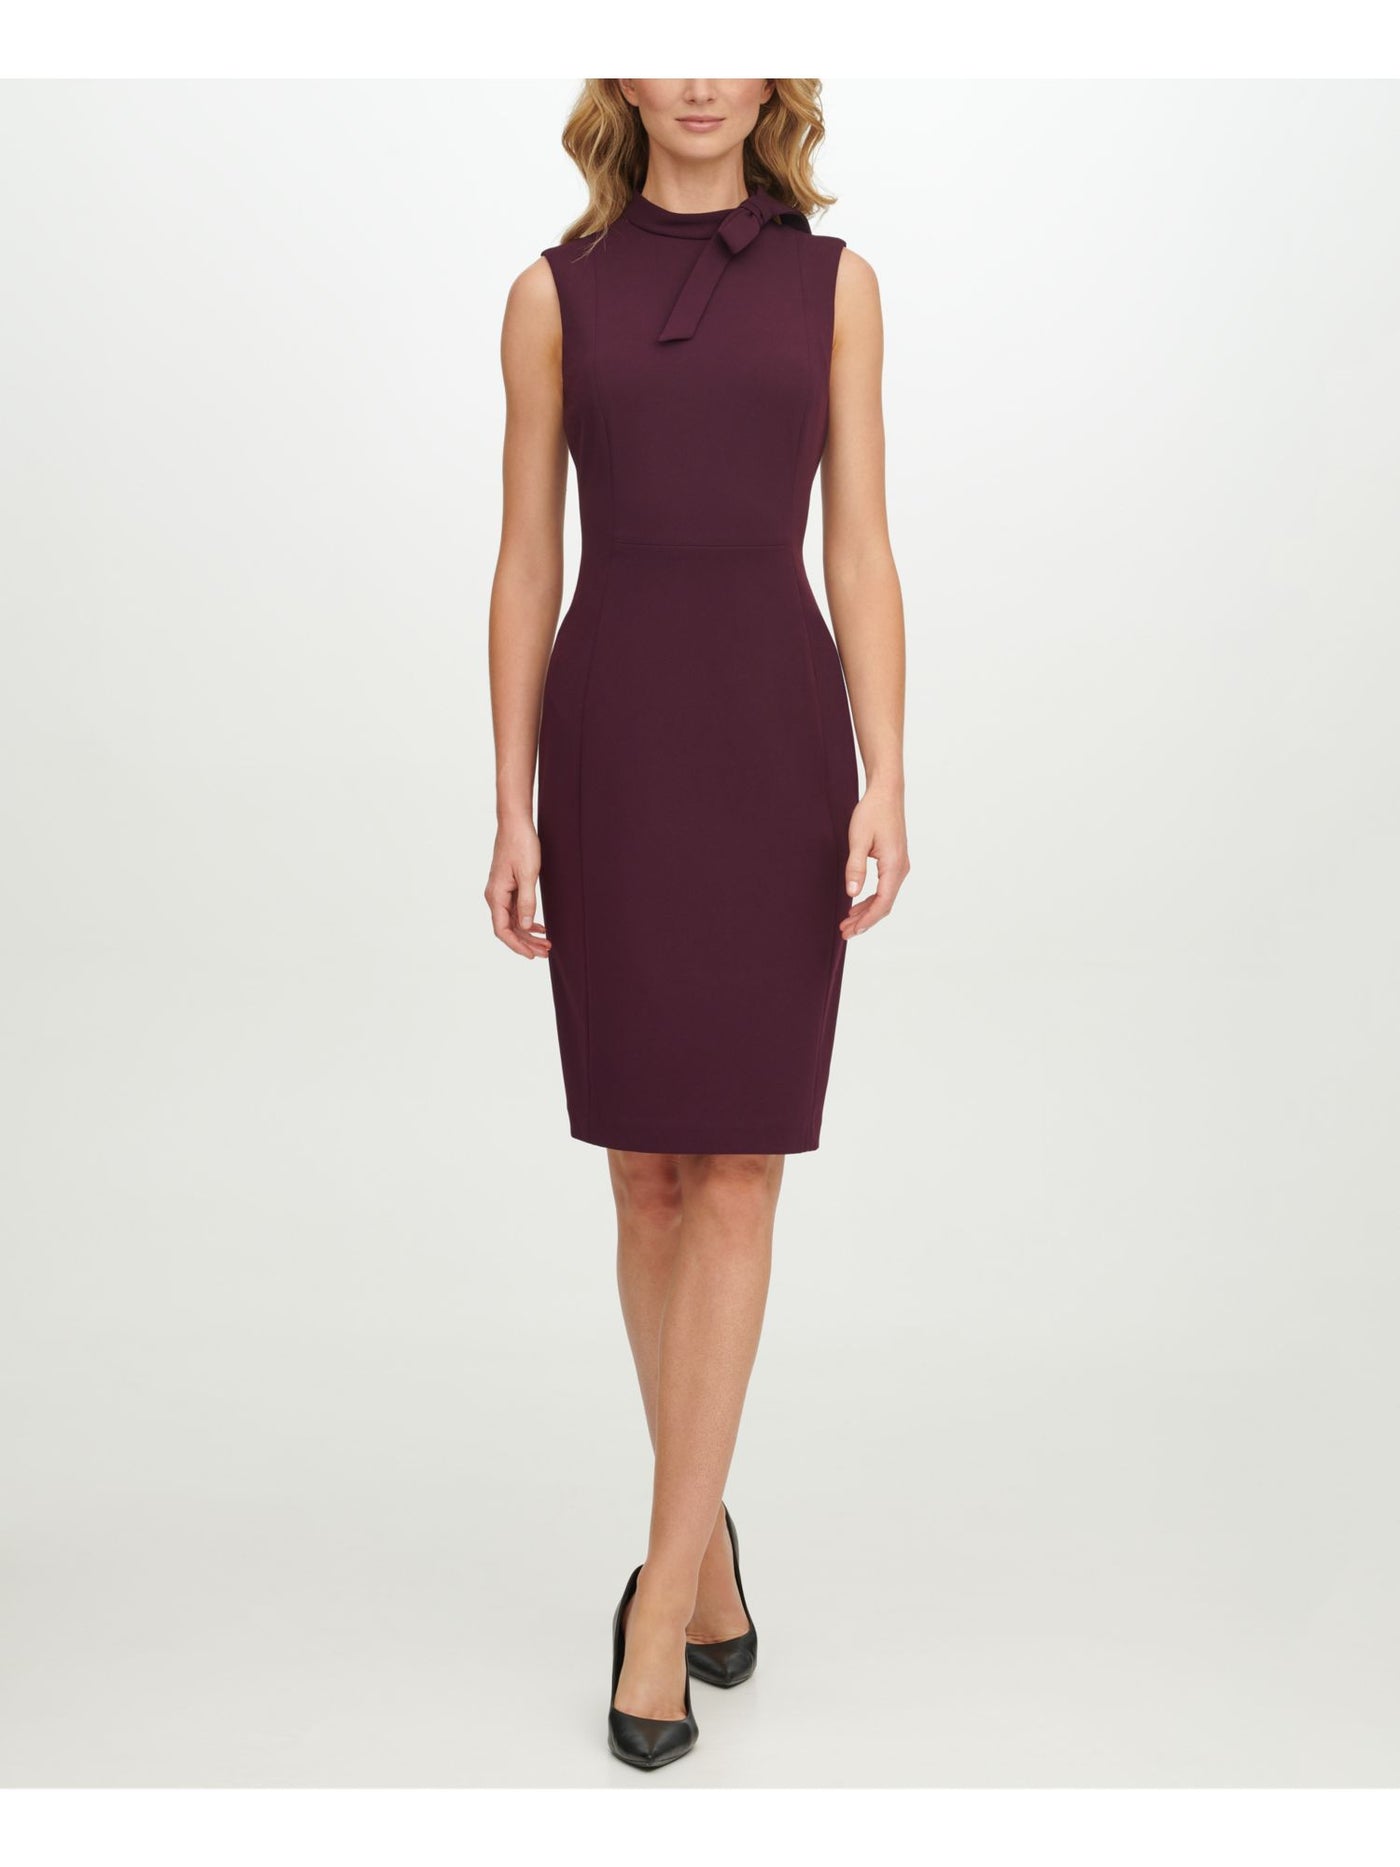 CALVIN KLEIN Womens Purple Zippered Unlined Bow Detail Sleeveless Round Neck Above The Knee Cocktail Sheath Dress 12